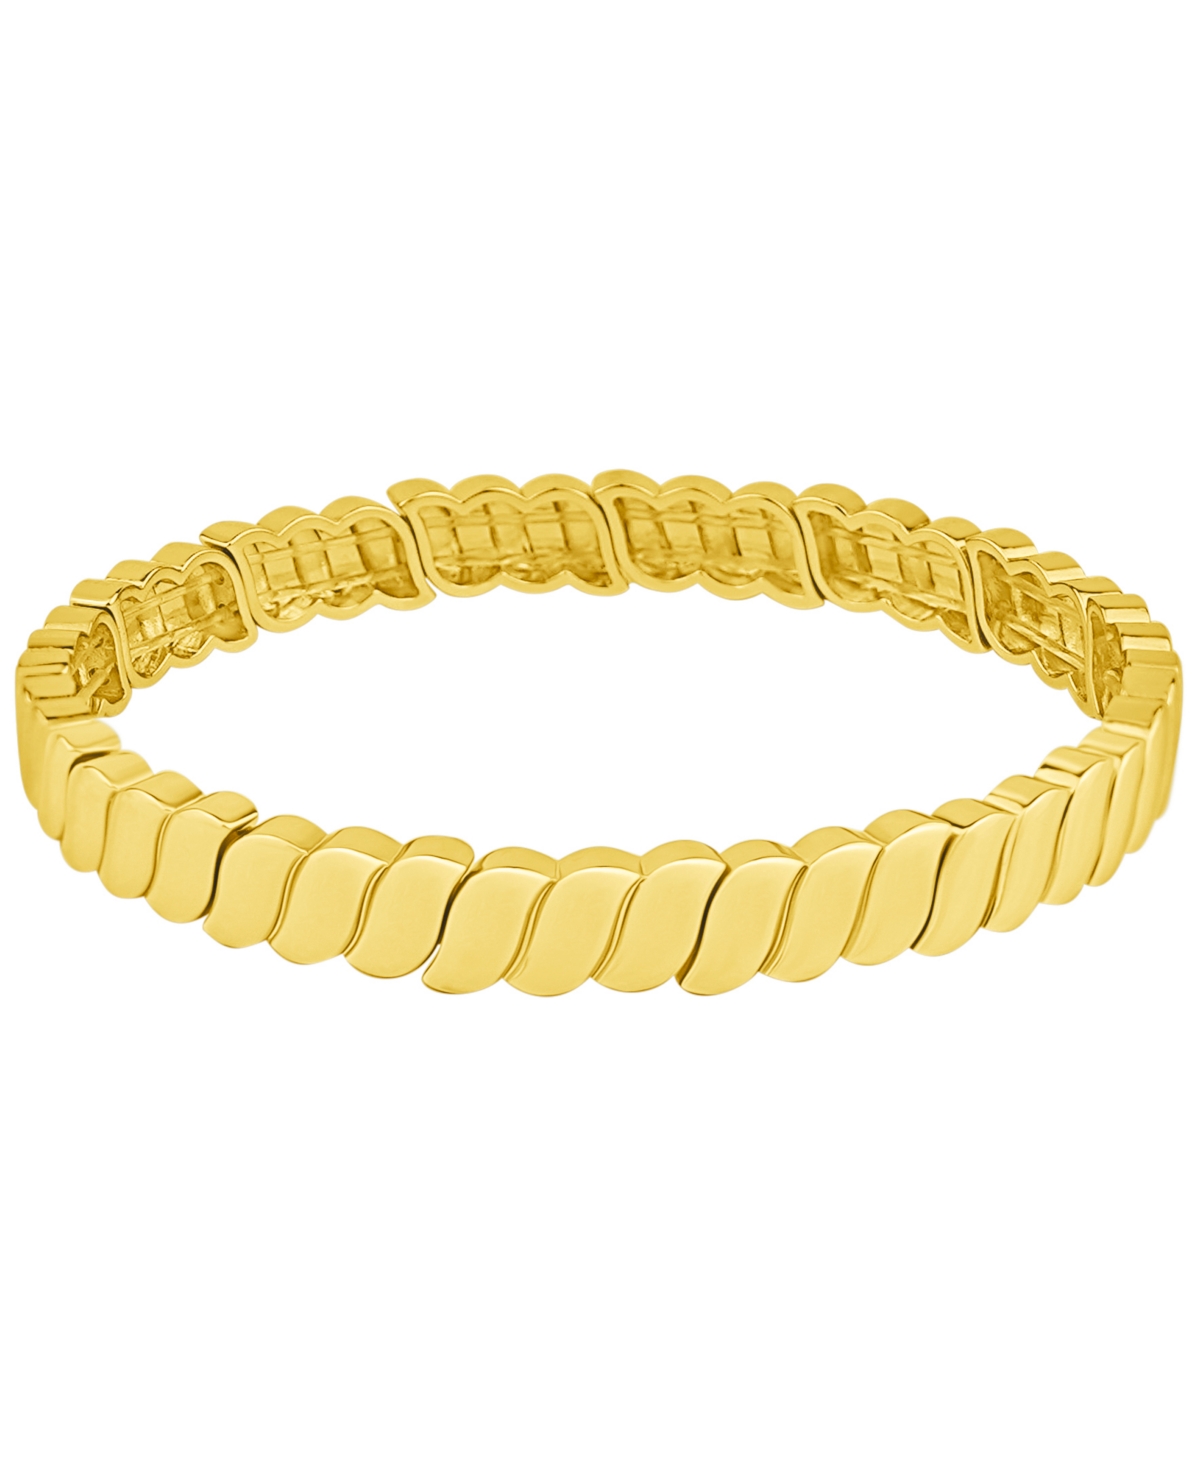 High Polished Stretch S Textured Bracelet in Fine Silver Plated - K Gold Plated